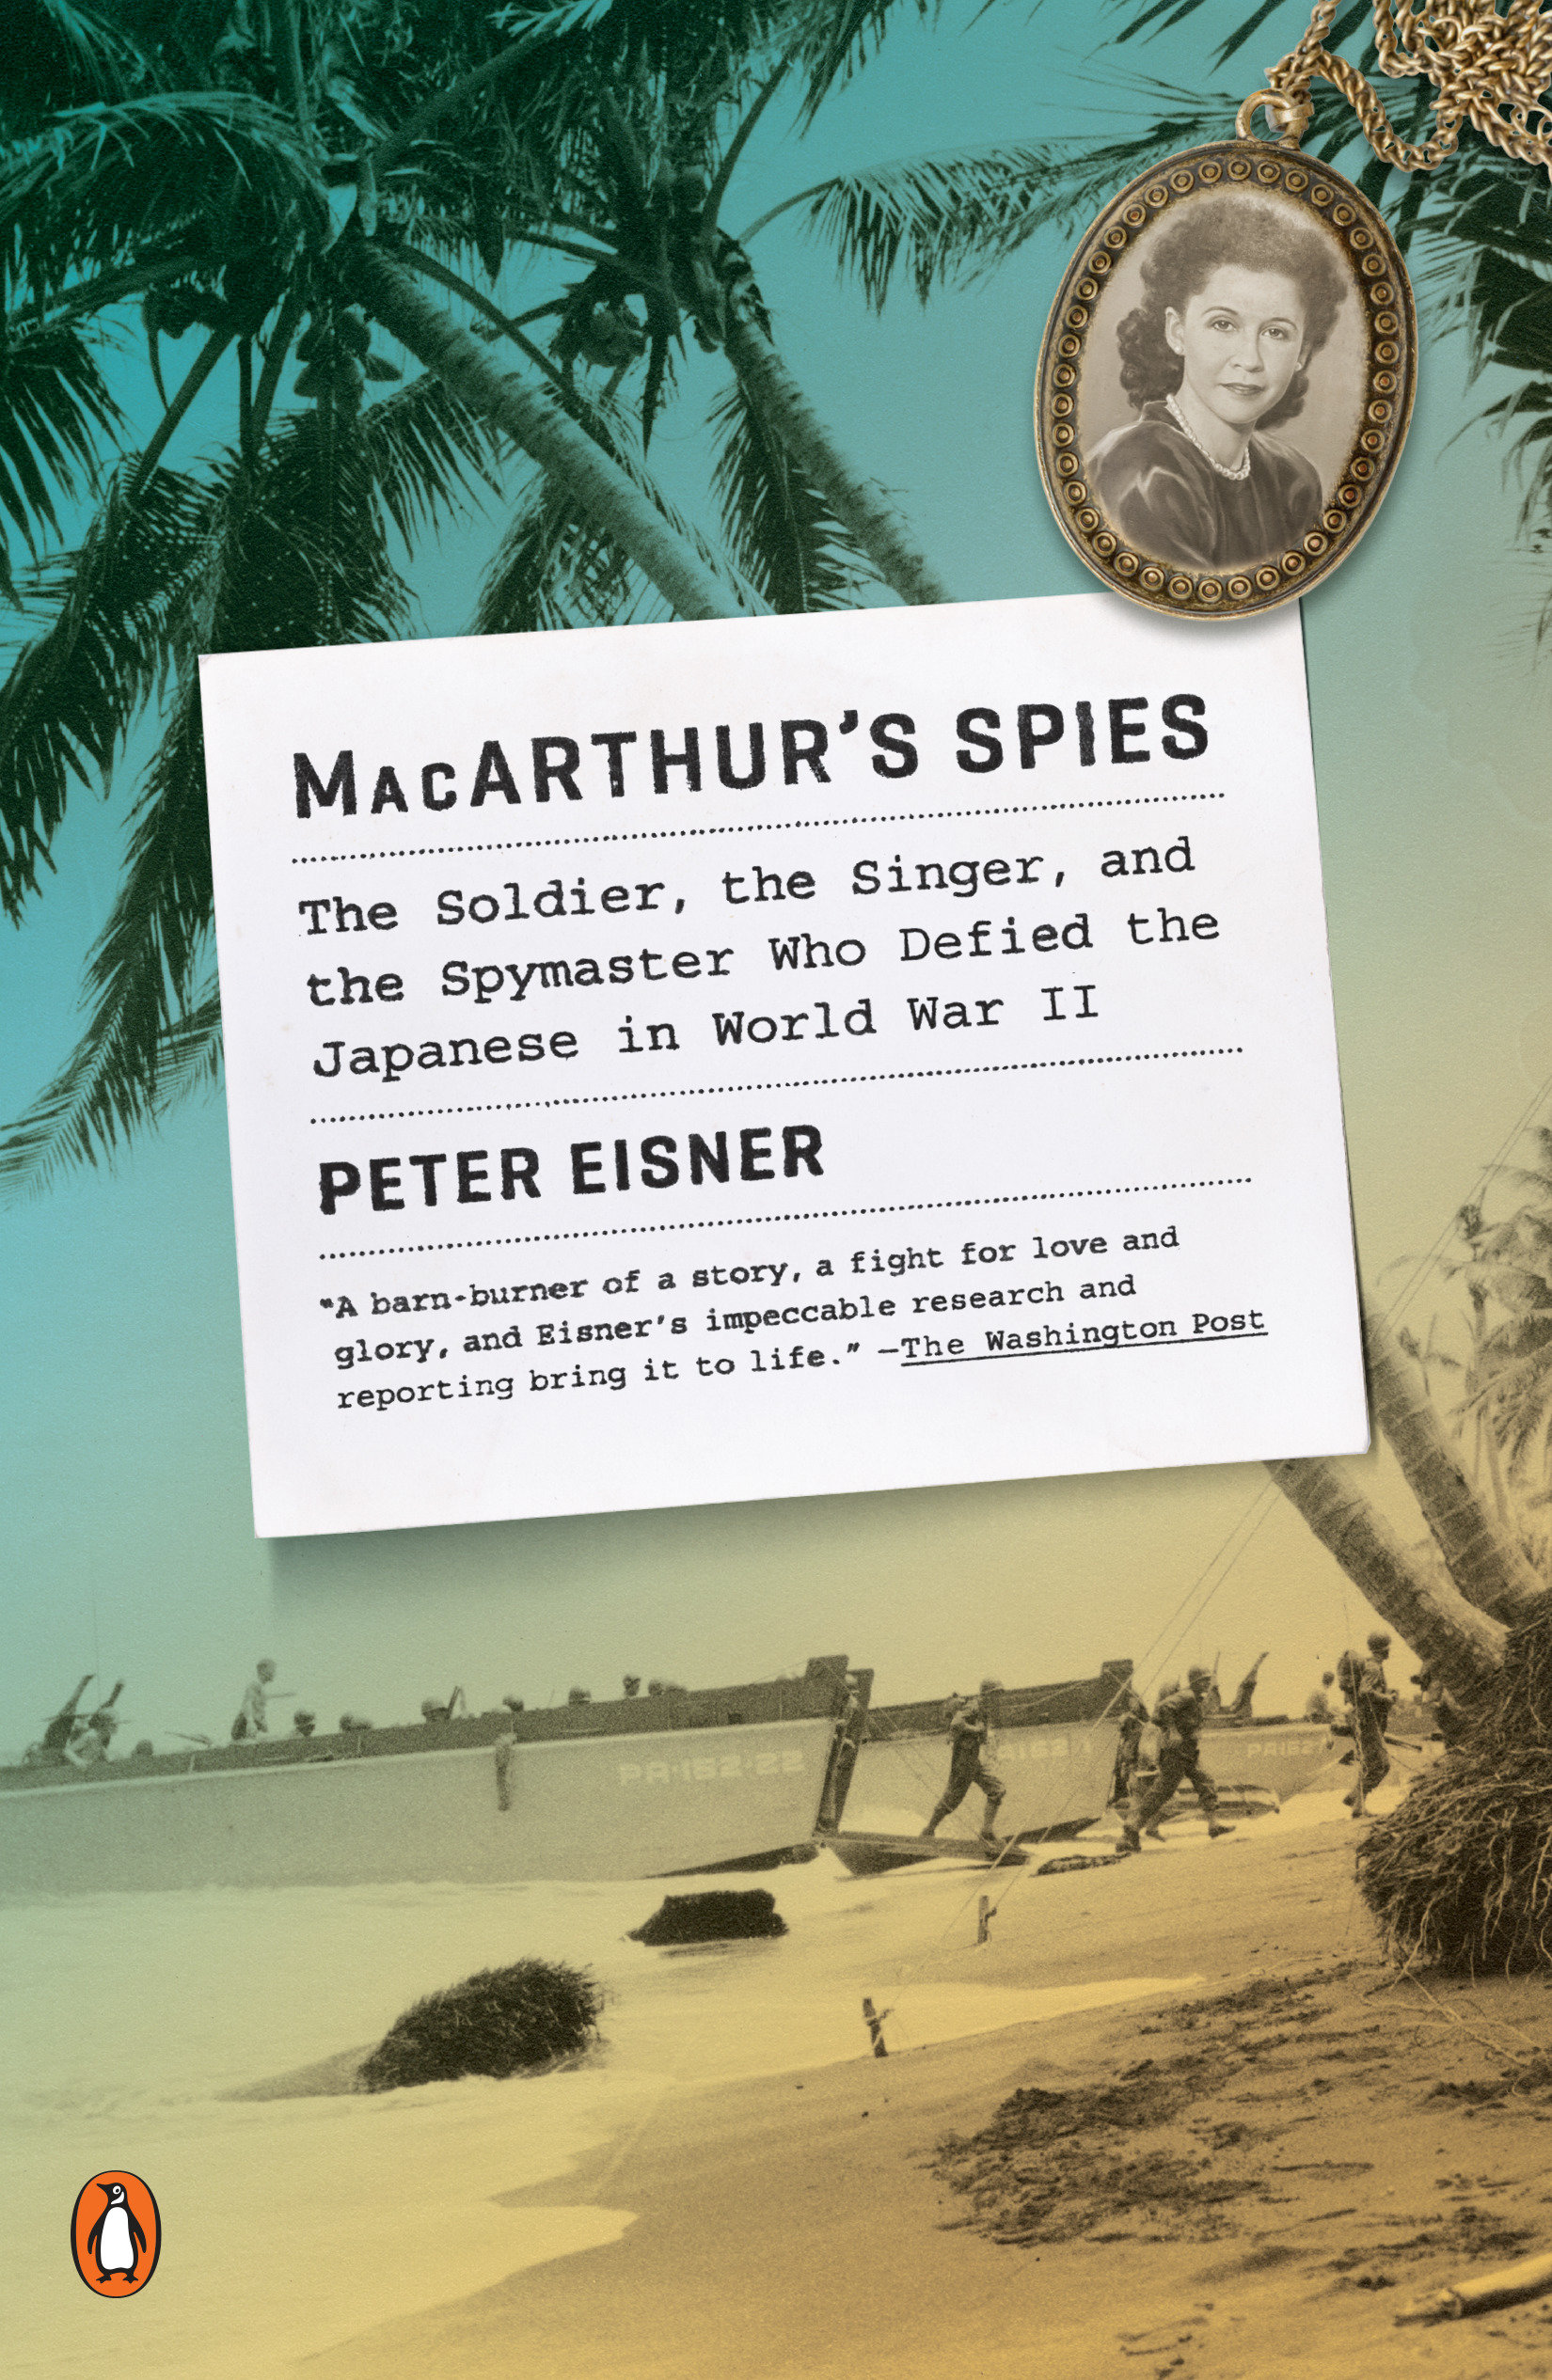 MacArthur's spies the soldier, the singer, and the spymaster who defied the Japanese in World War II cover image